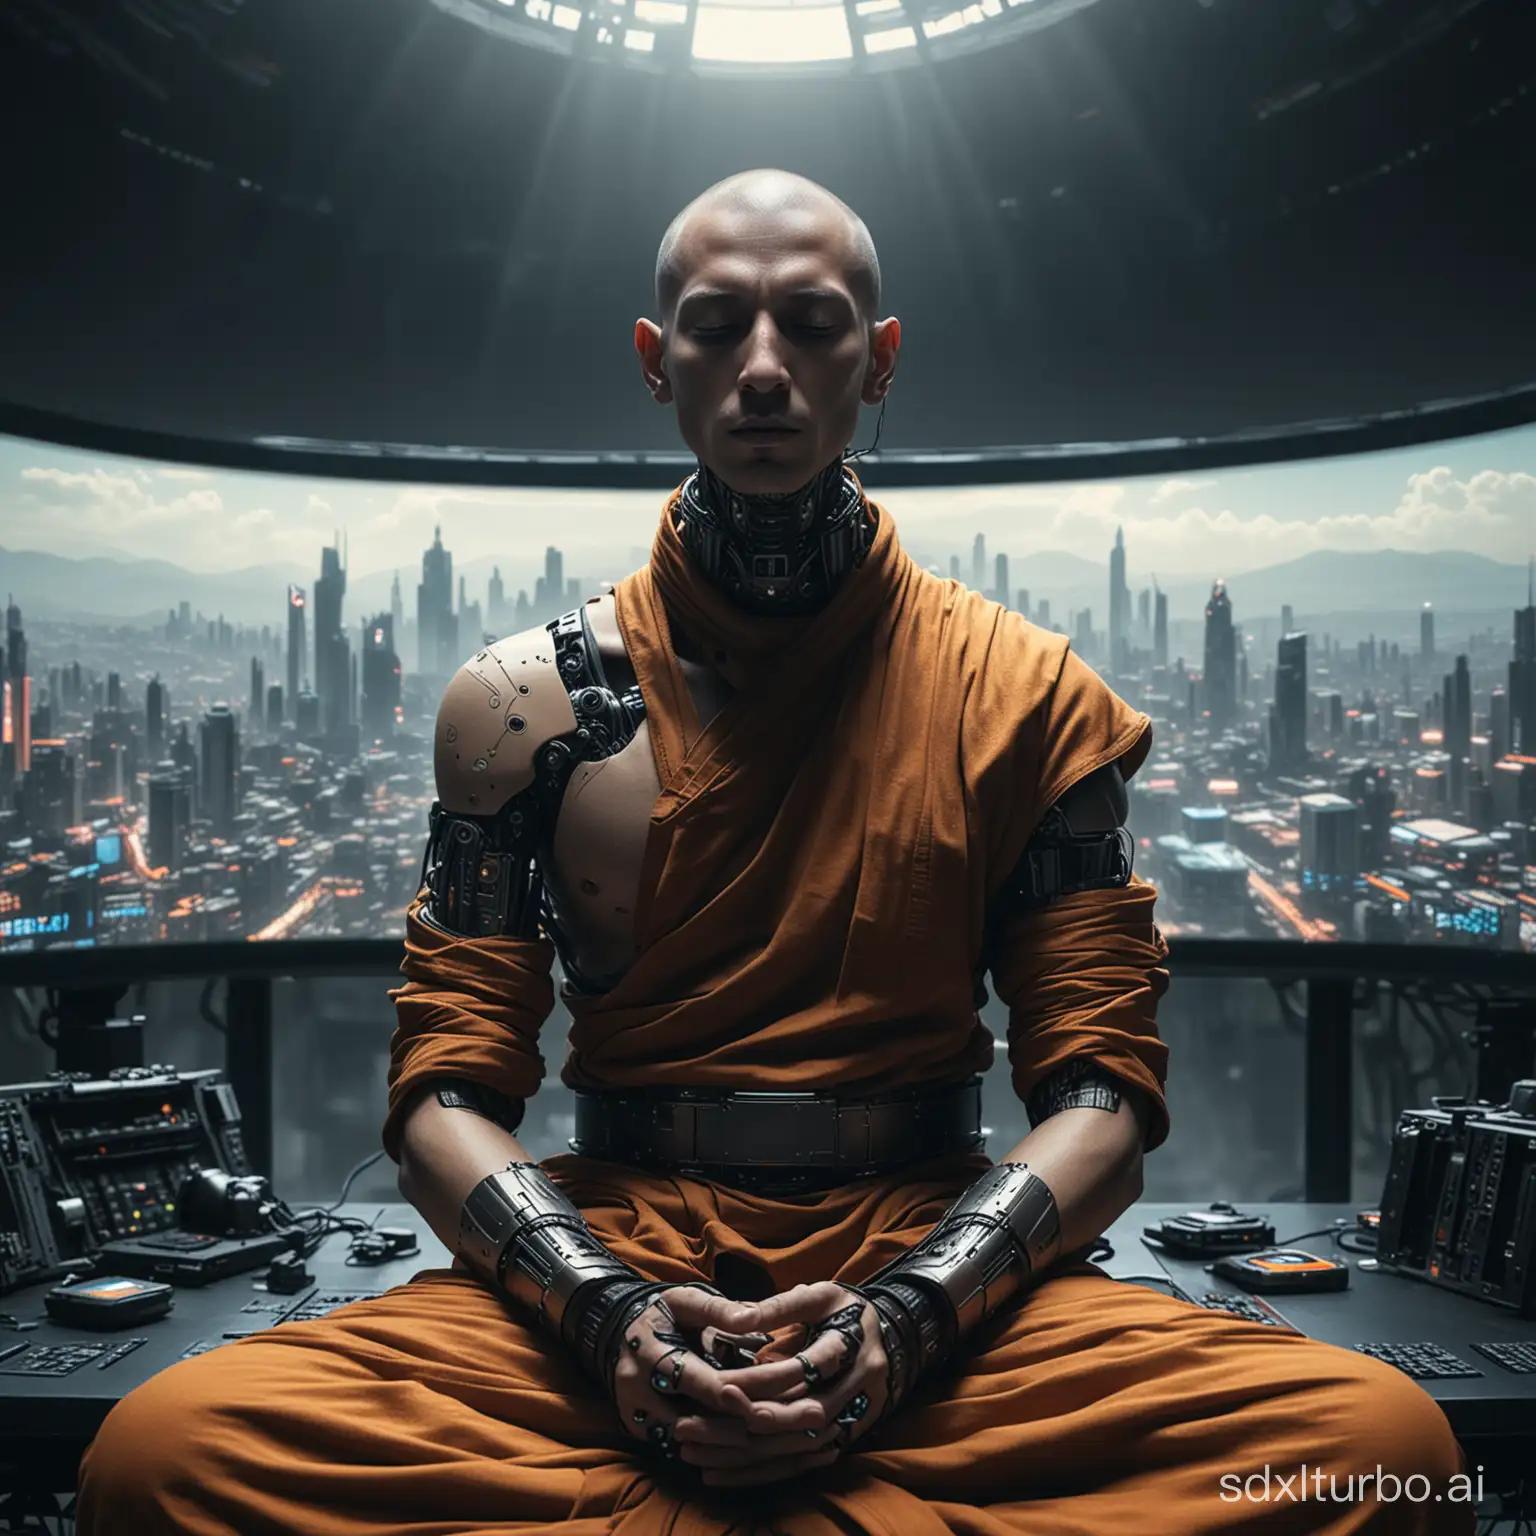 a monk in meditation, he is half human, half robot, he is in meditative position, flying, cybernetic, cyberpunk, multiple monitors around
ultraquality, 8k, Shot in a EOS 5d Max f2.5